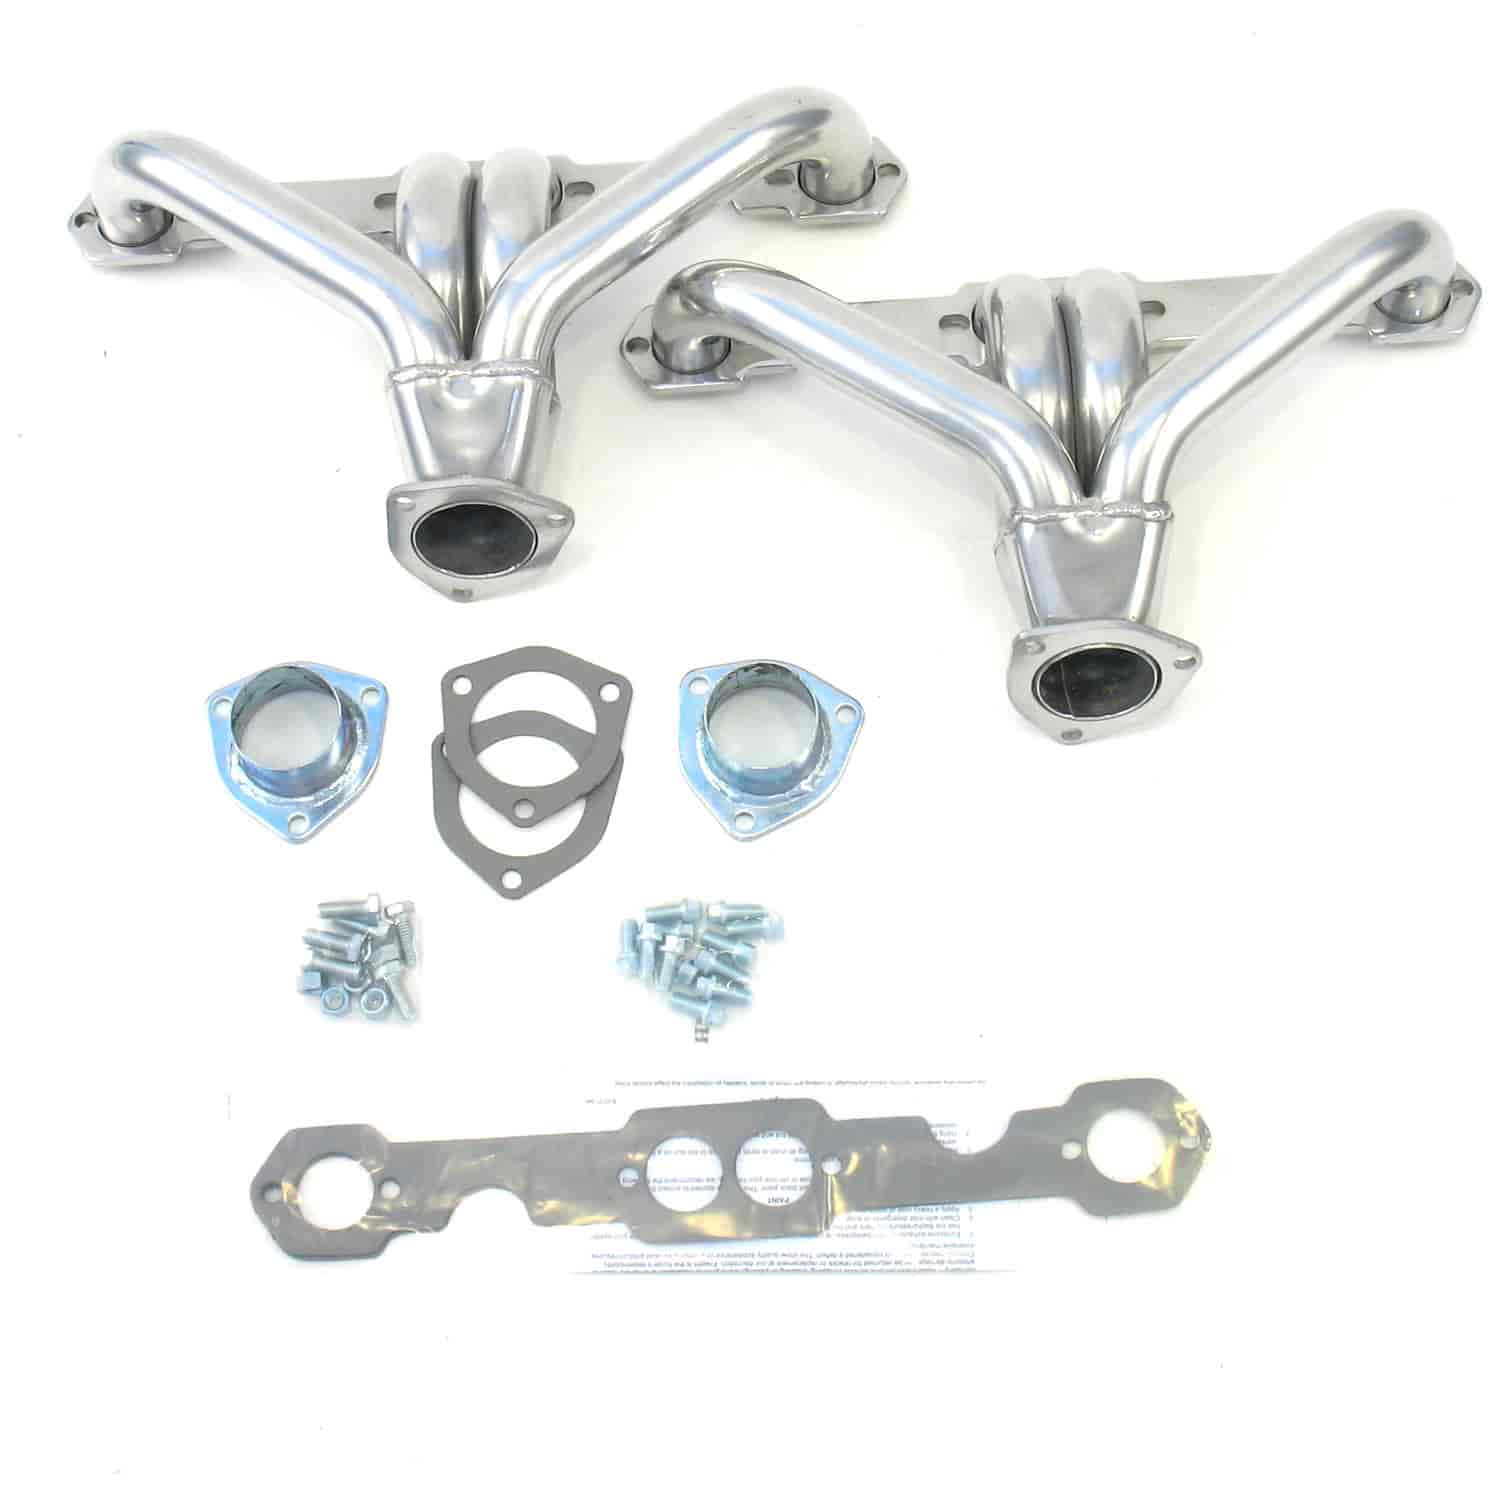 Tight Tuck Headers Small Block Chevy 265-400 (Round Ports)